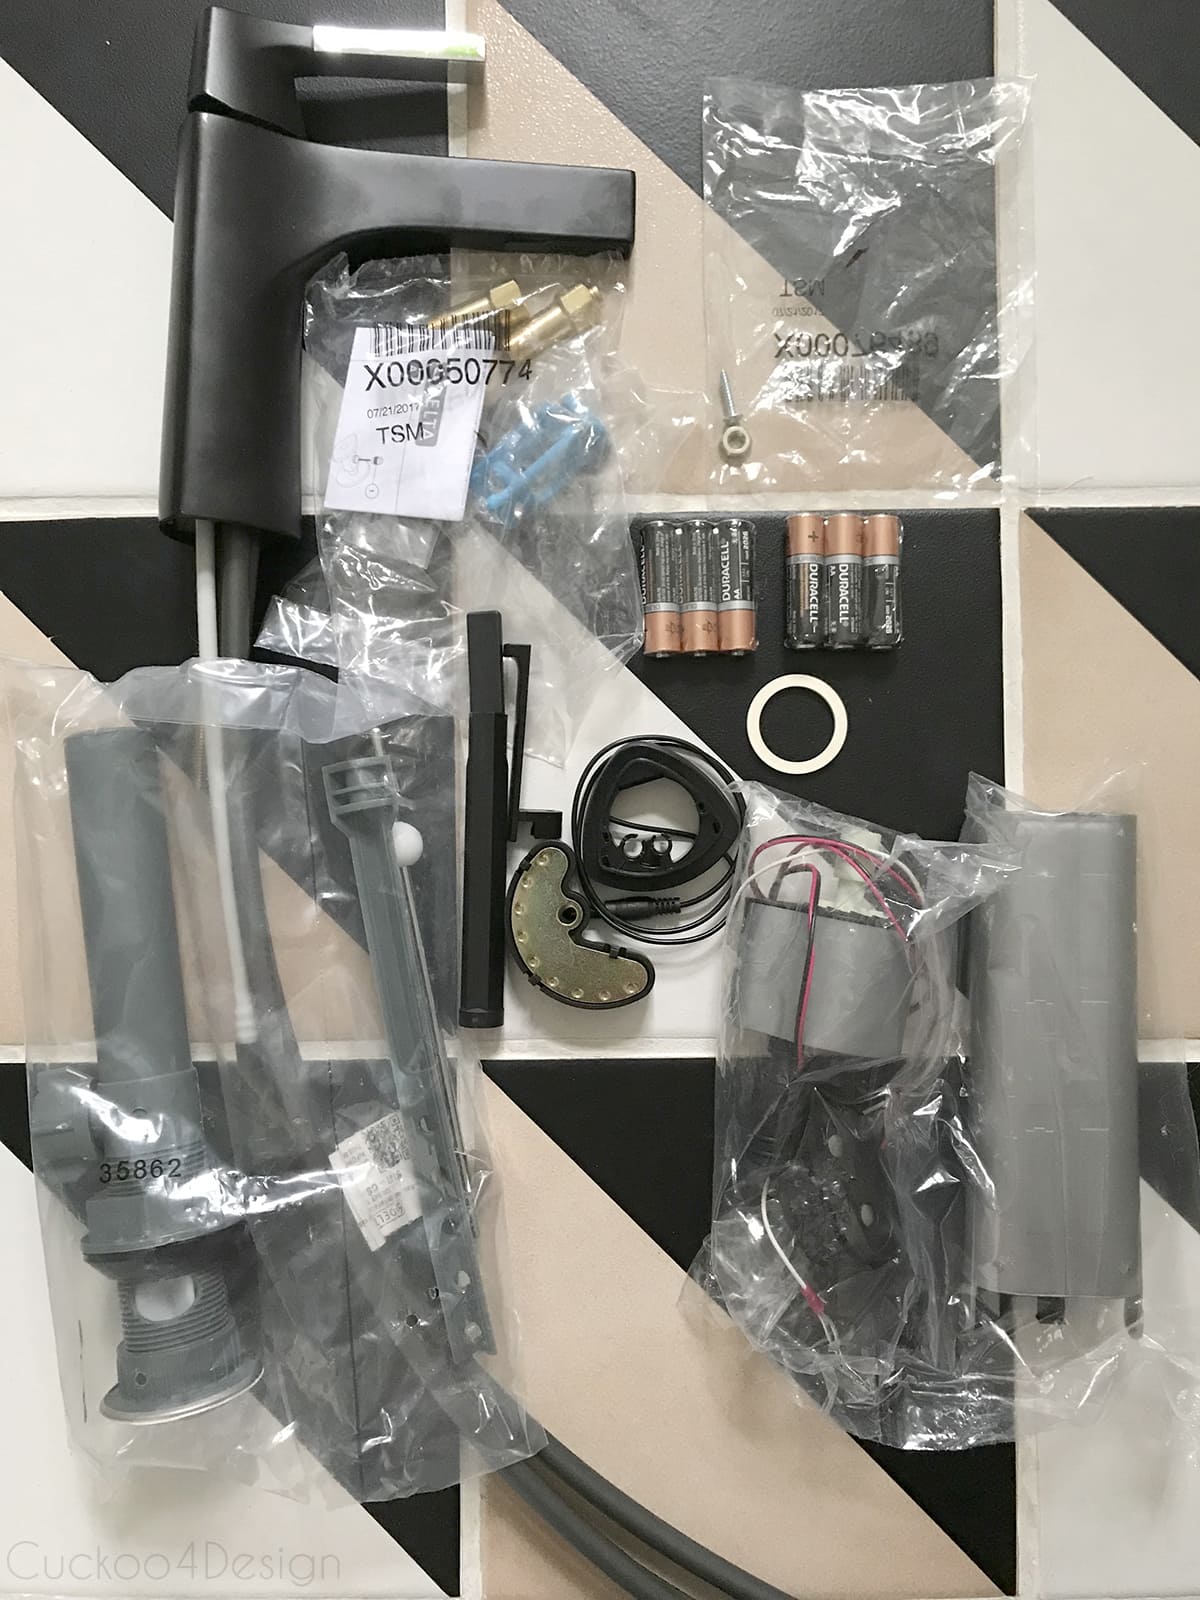 supplies and materials laying on the floor to install a Delta Faucet 574T-CS-DST Zura Single Handle Centerset Bathroom Faucet with Touch2O.xt Technology under an Ikea Godmorgon floating vanity